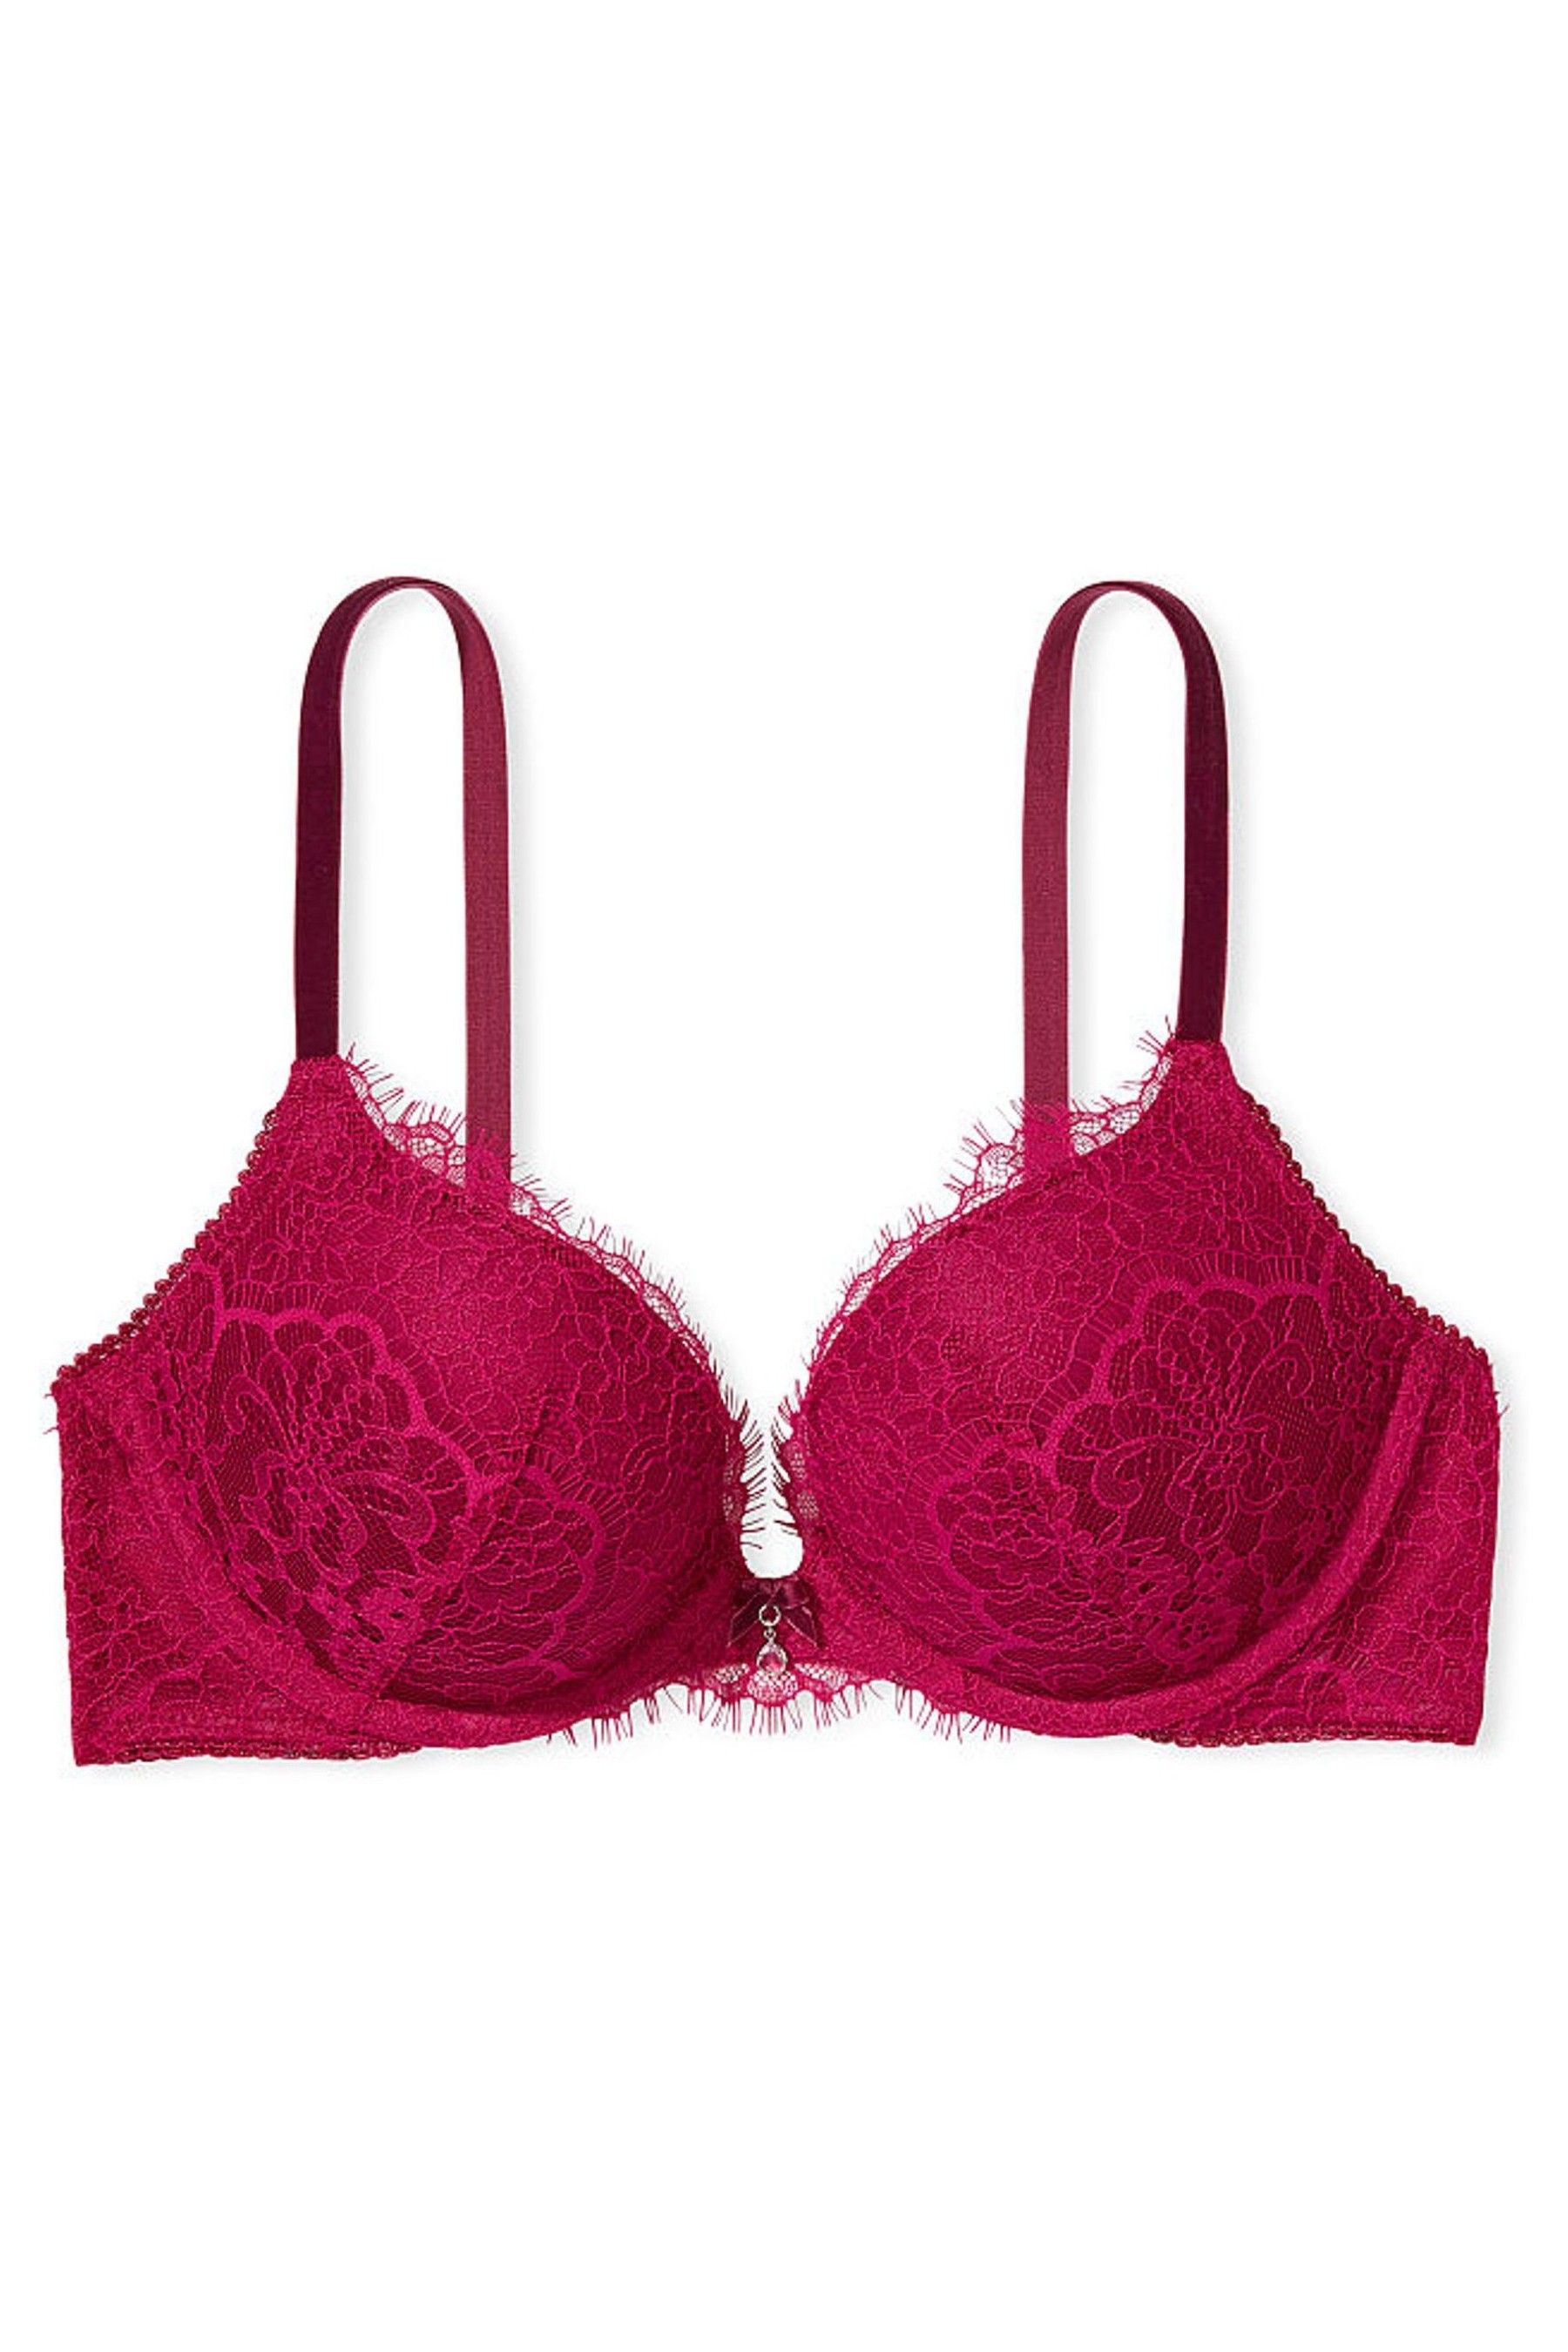 Buy Victoria's Secret Claret Red Lace Push Up Bra from the Victoria's ...